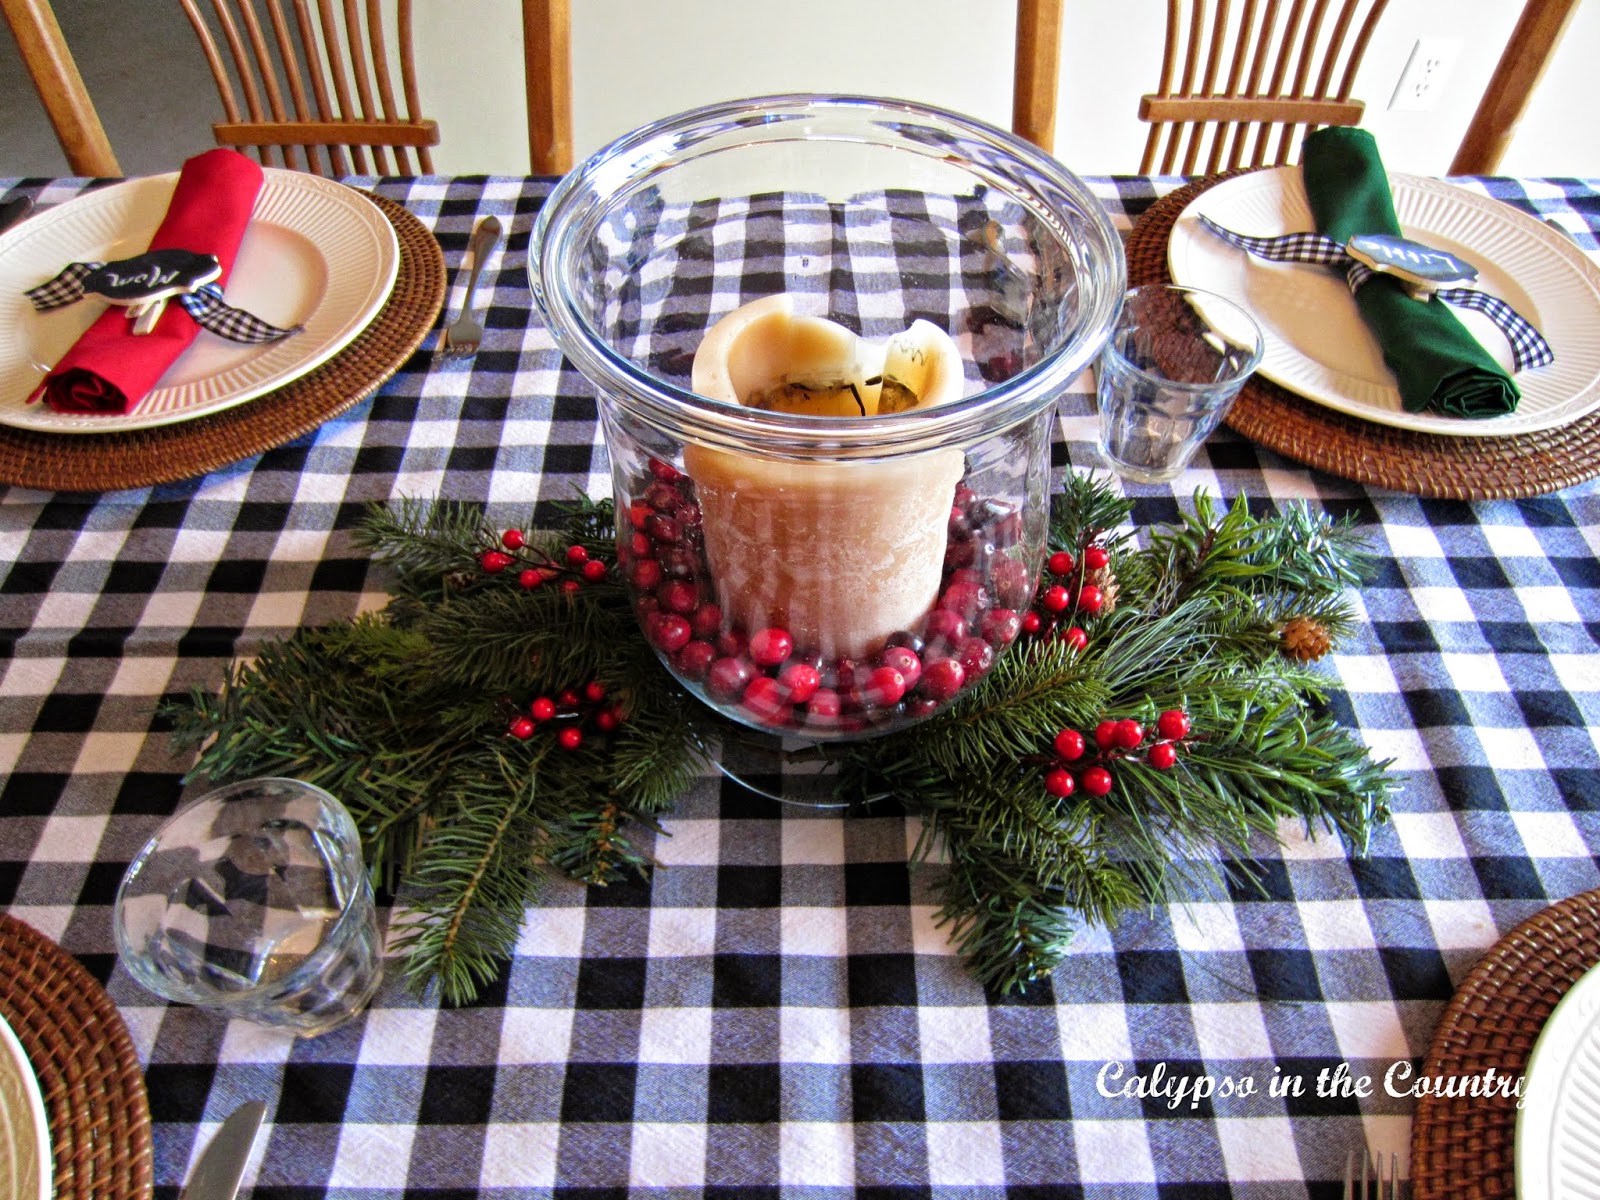 Candles Centerpiece - Christmas Breakfast table